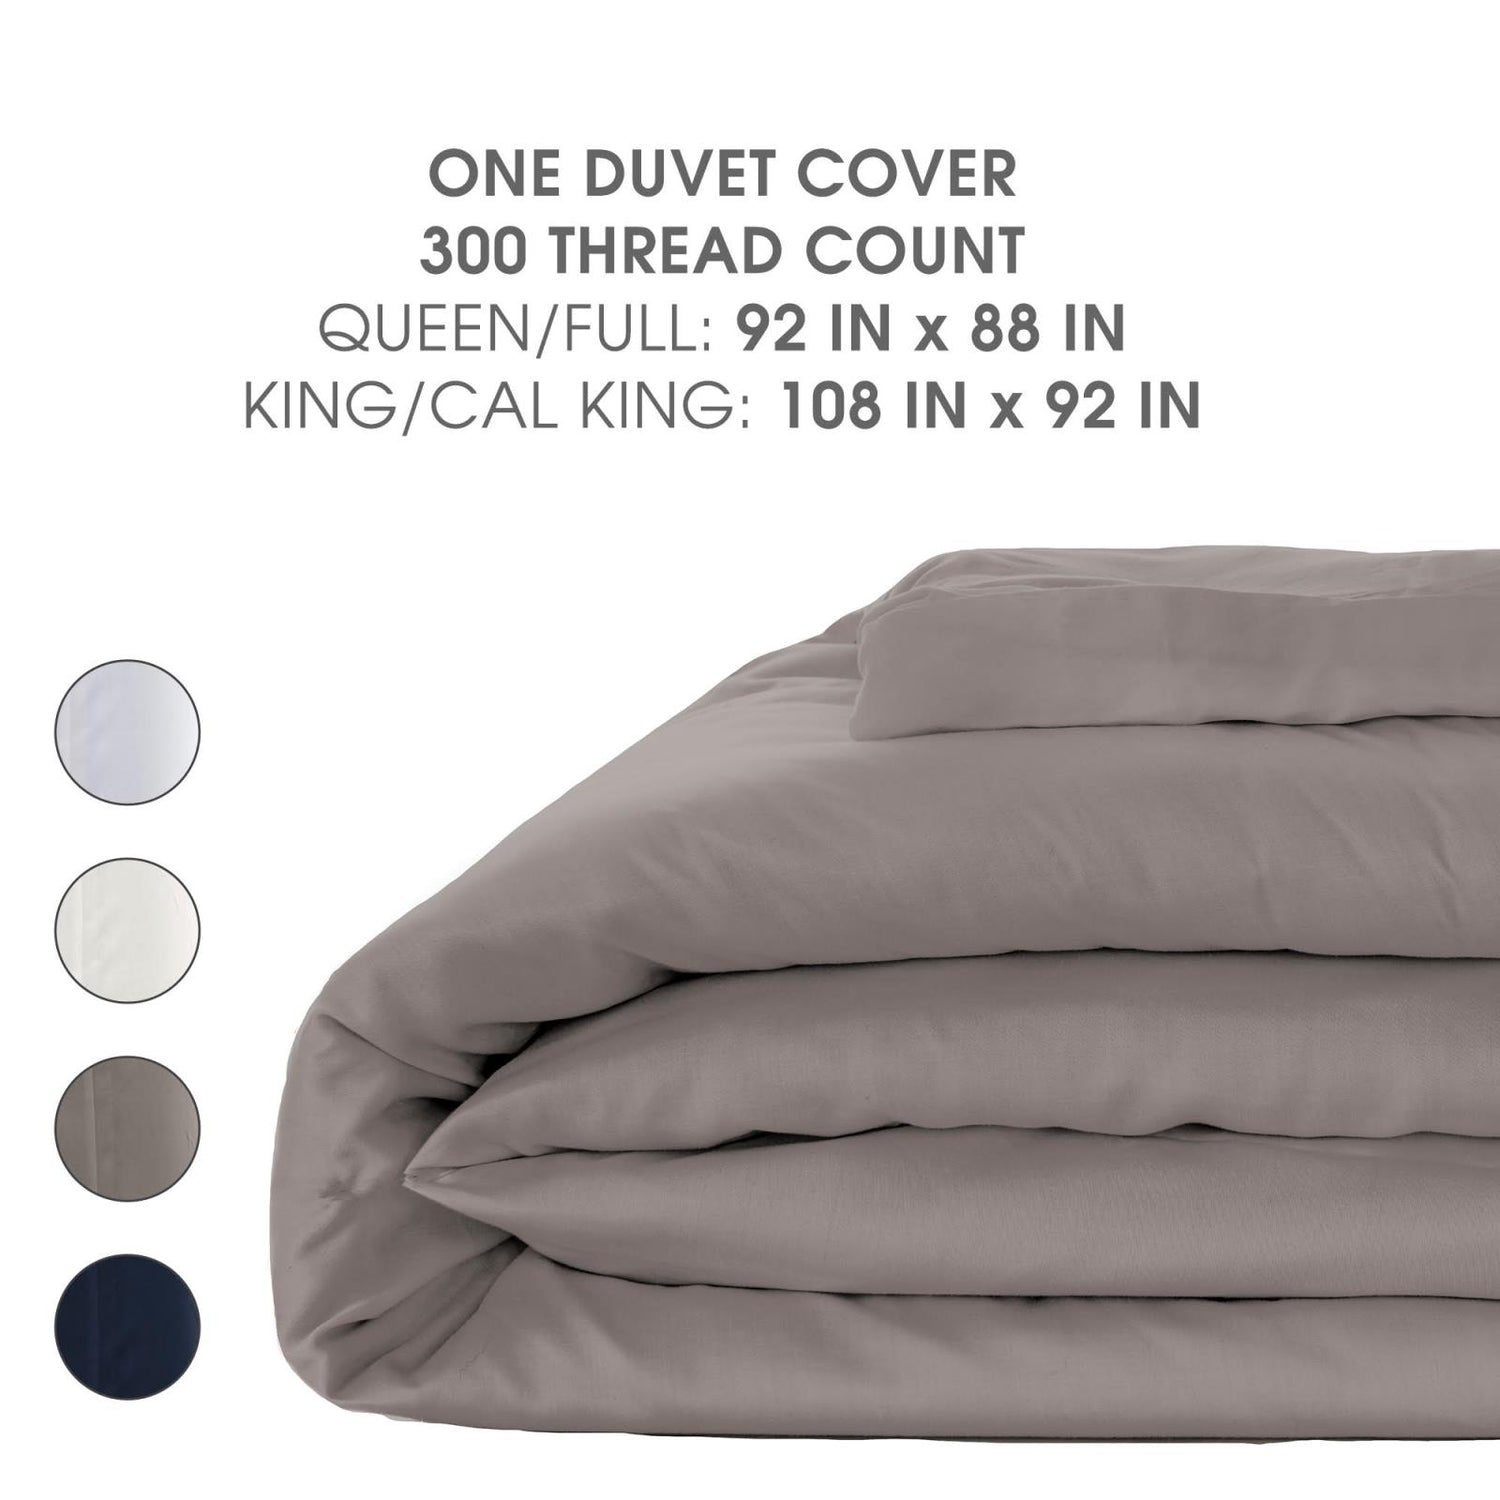 Woven Duvet Cover in Natural Buttercup